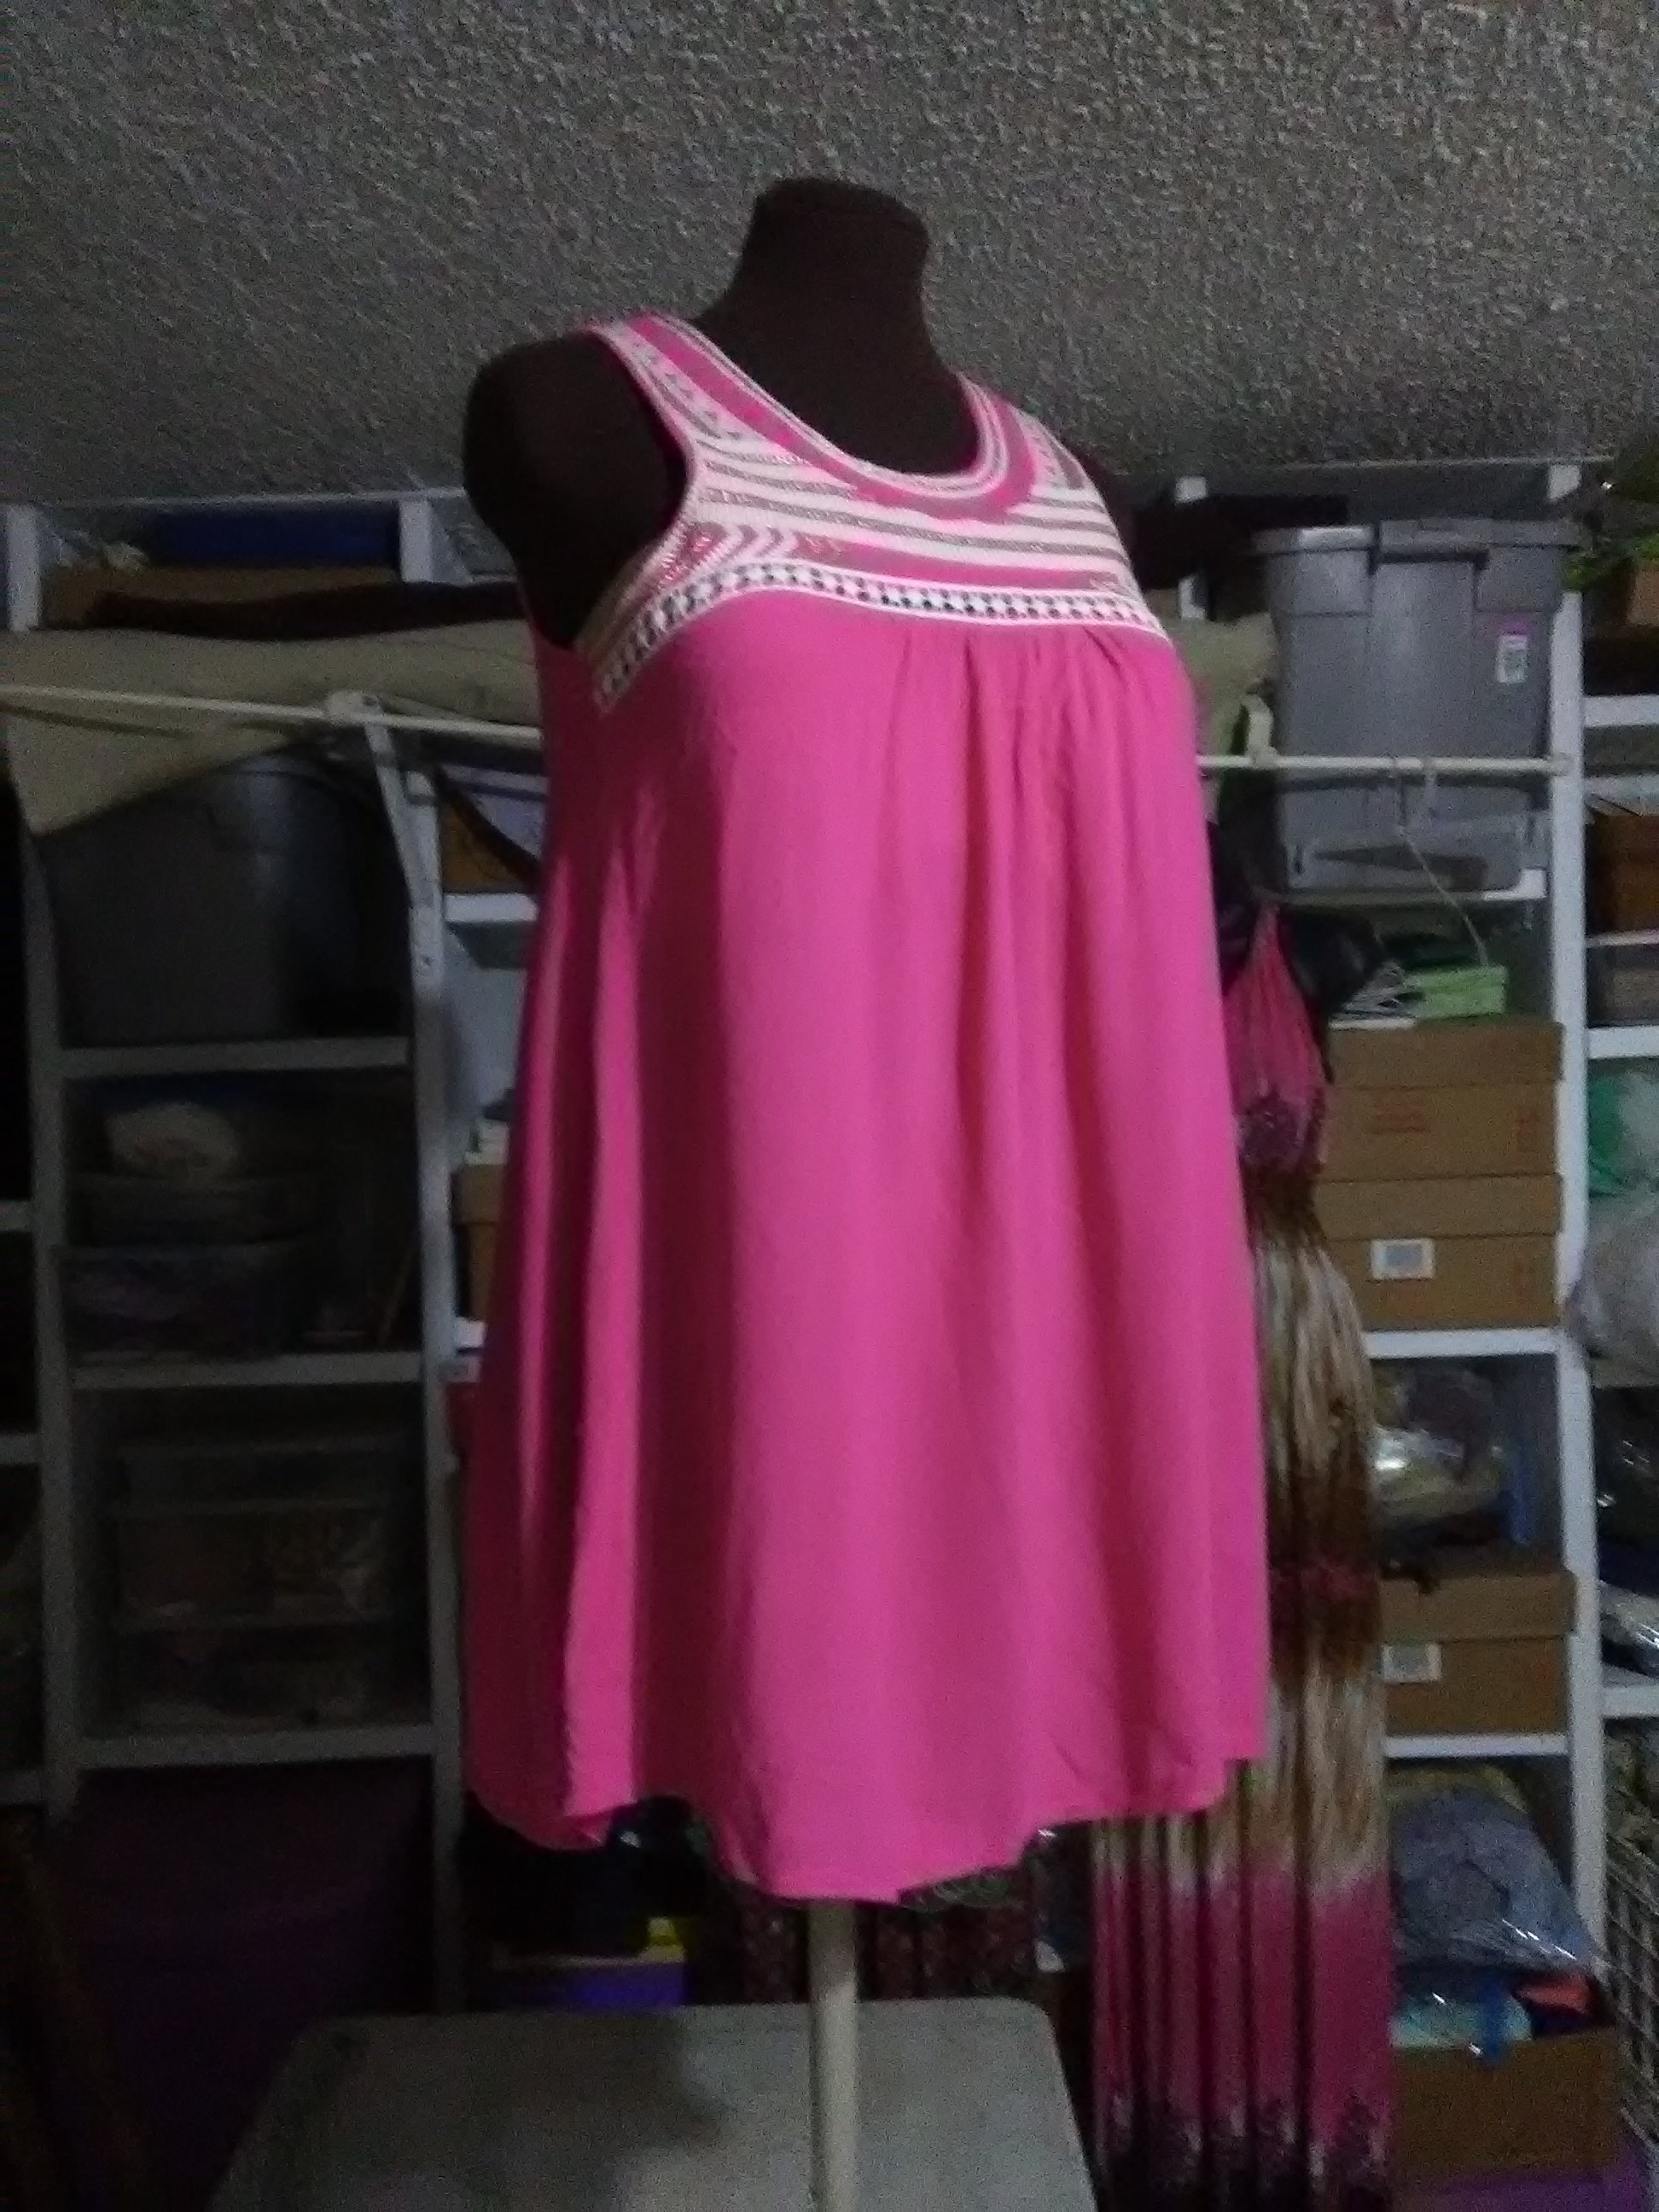 Pink tunic after removing the lining.